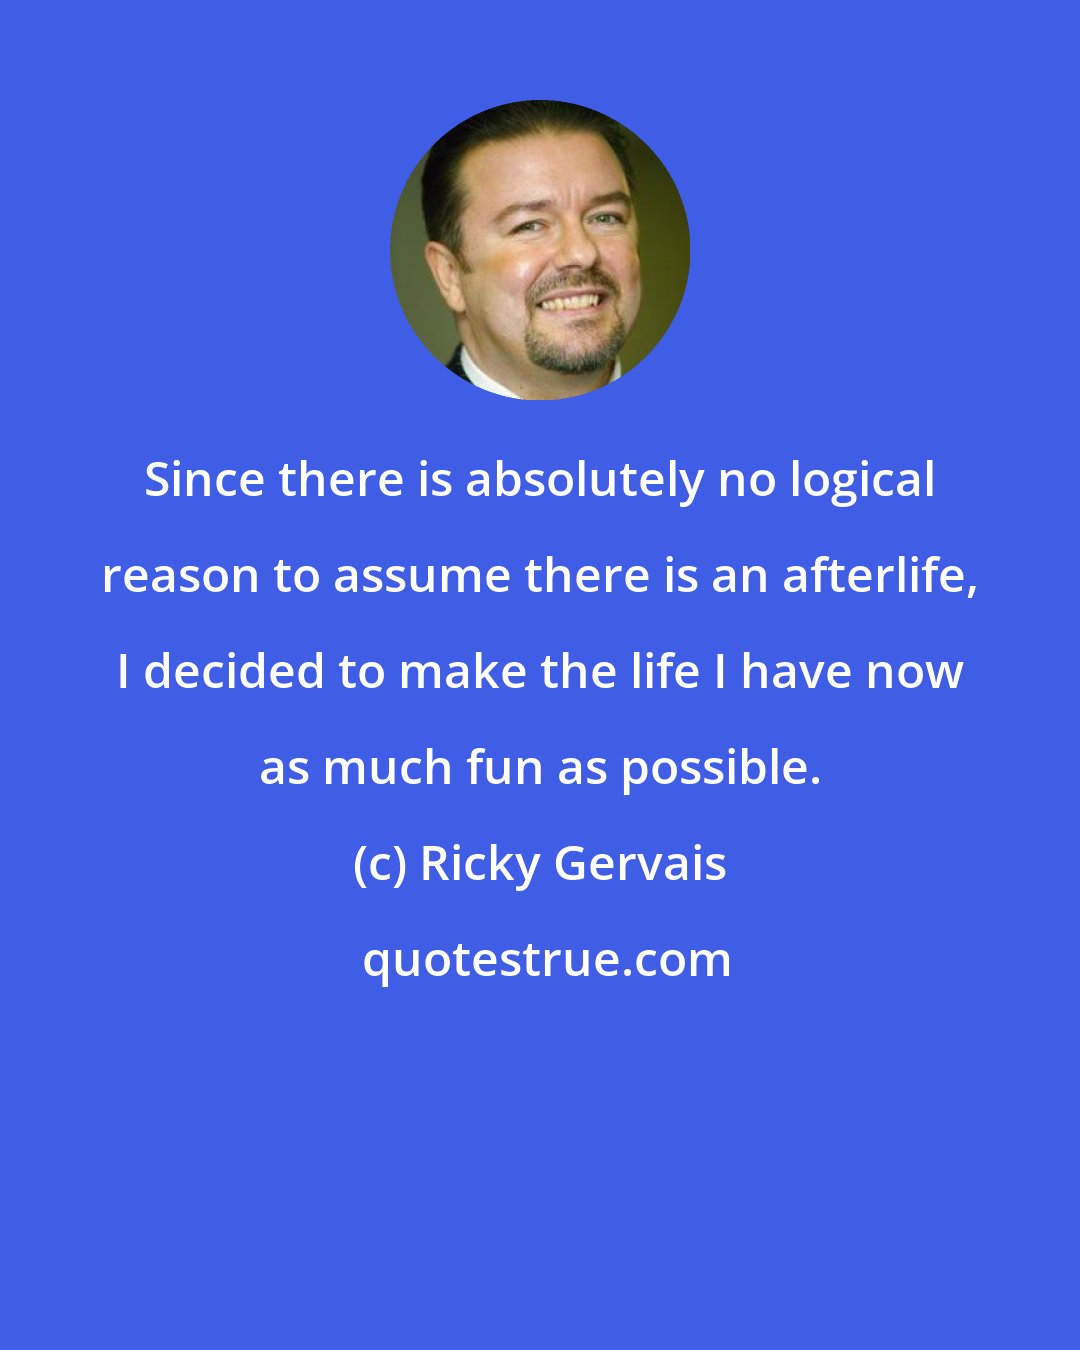 Ricky Gervais: Since there is absolutely no logical reason to assume there is an afterlife, I decided to make the life I have now as much fun as possible.